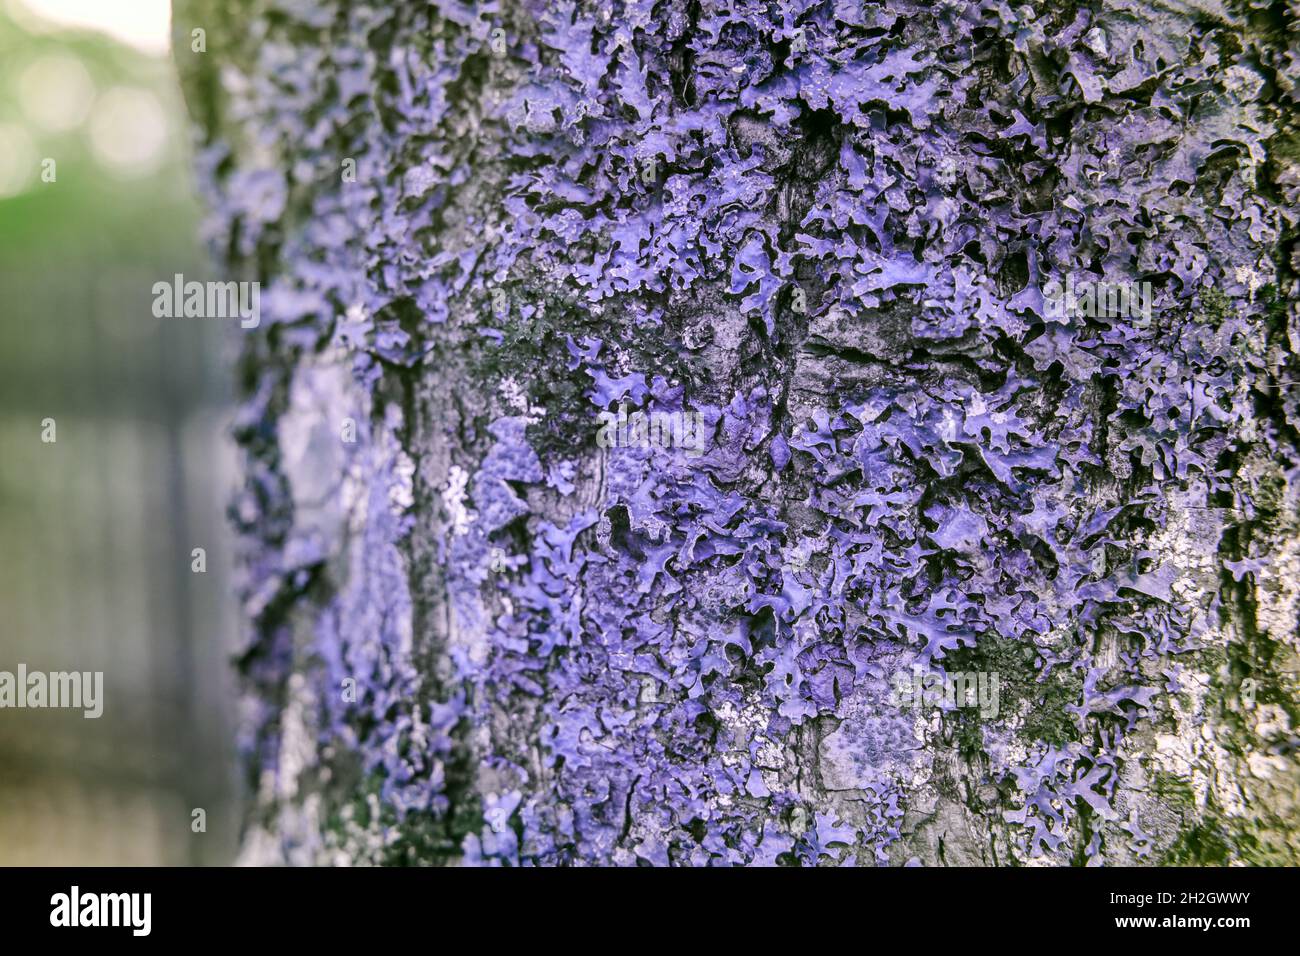 Lichen on a tree in reflected ultraviolet photography Stock Photo